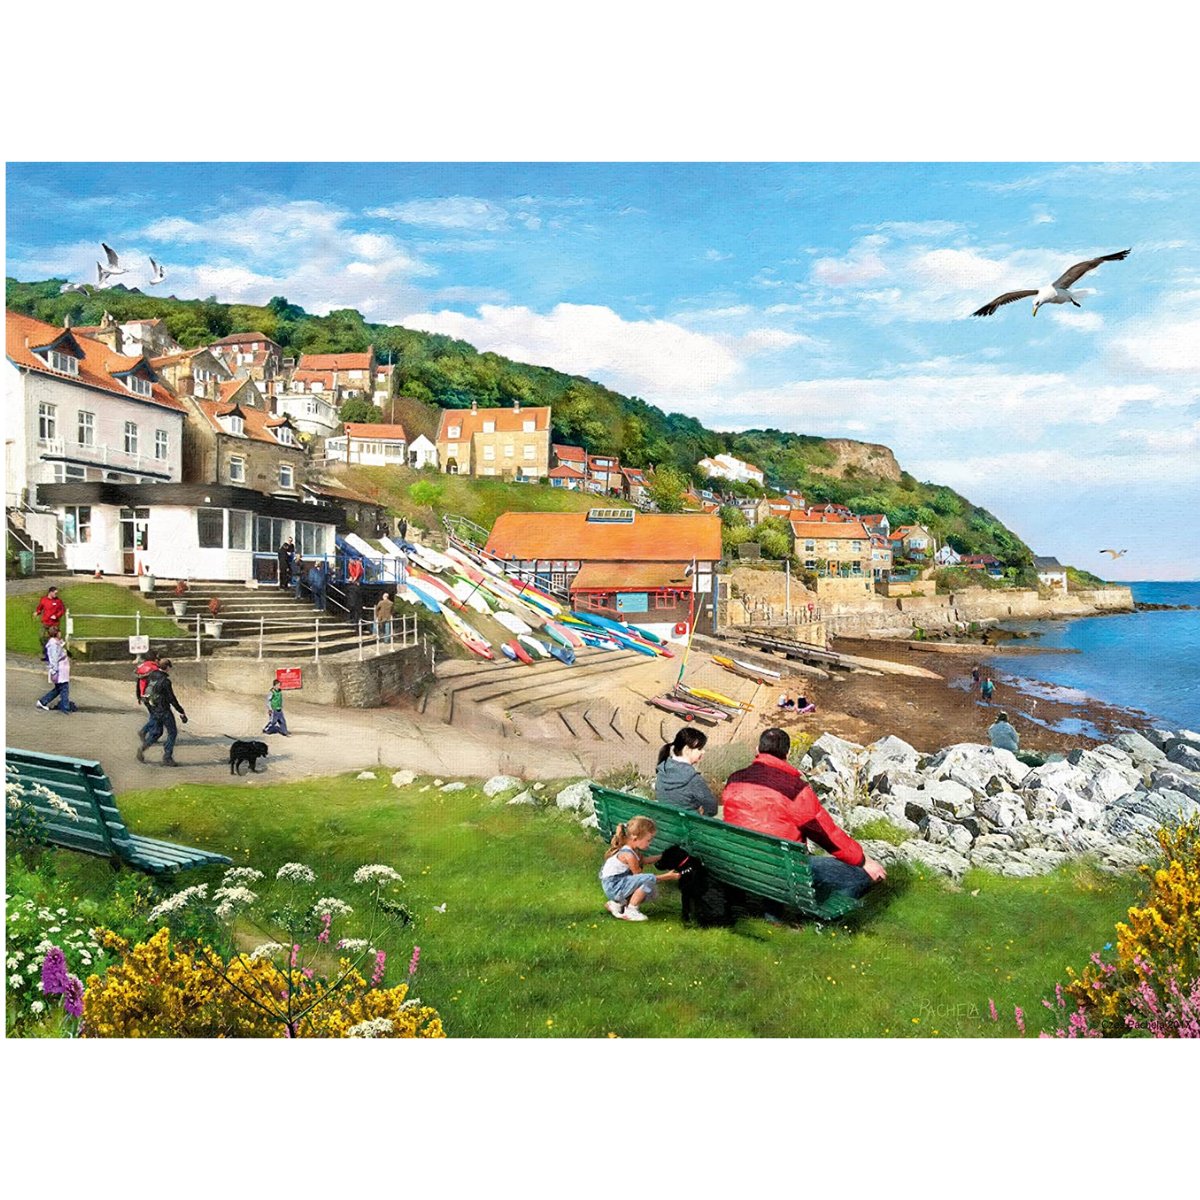 Ravensburger Picturesque Yorkshire, Whitby & Runswick Bay (2x 500 Pieces) - Phillips Hobbies